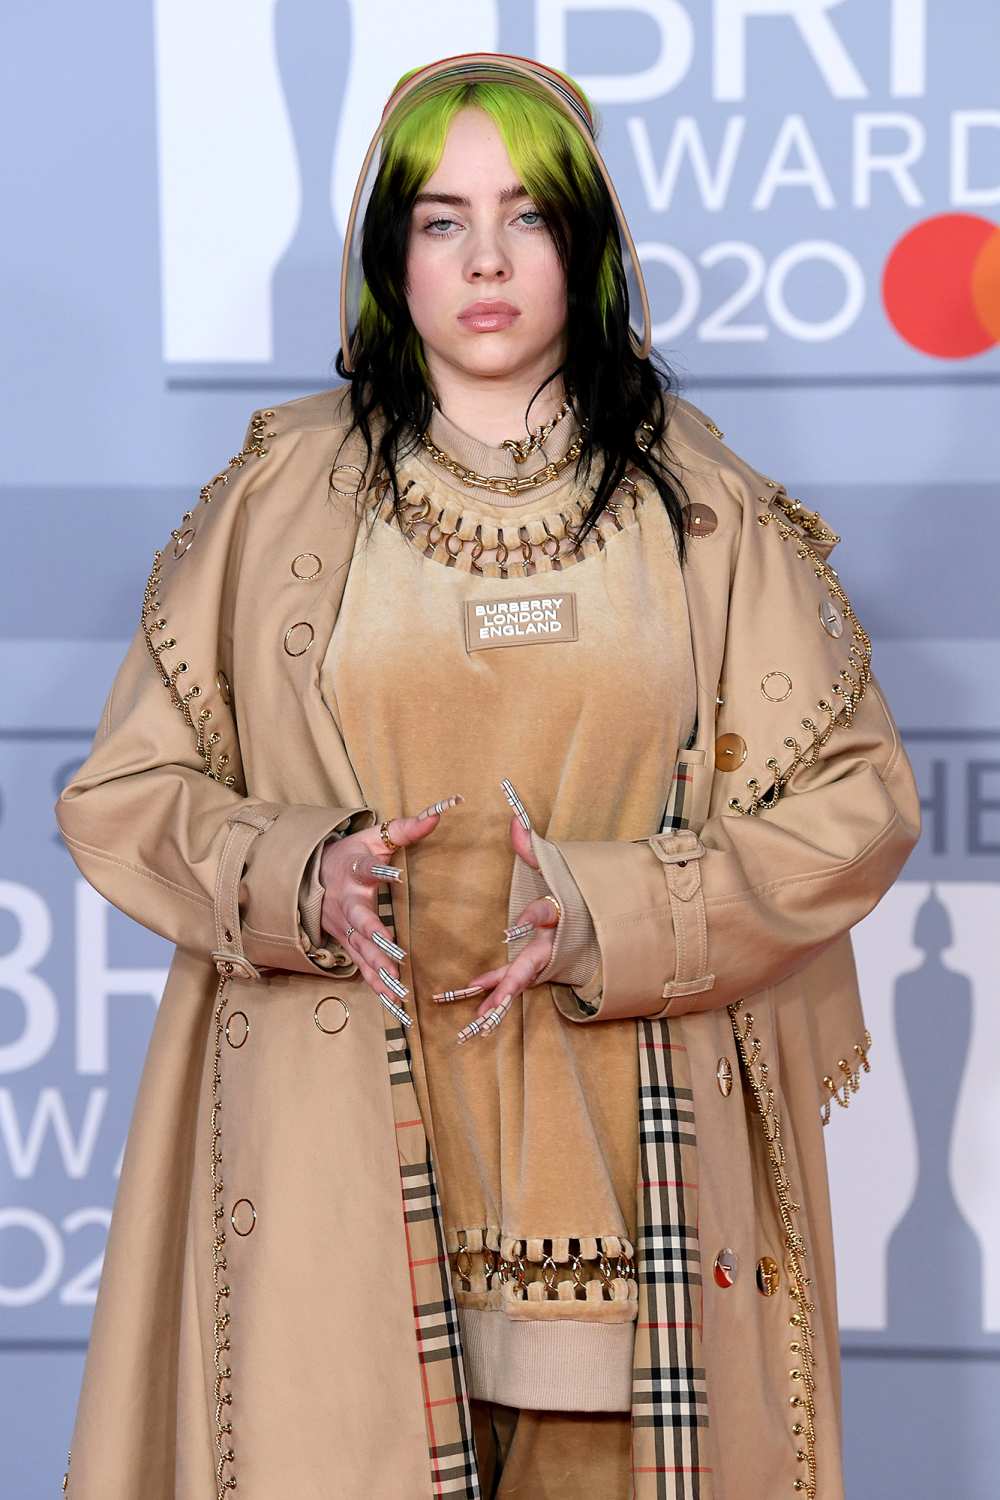 Billie Eilish Says She’s ‘Ashamed’ of Past Behavior Following Racism Accusations